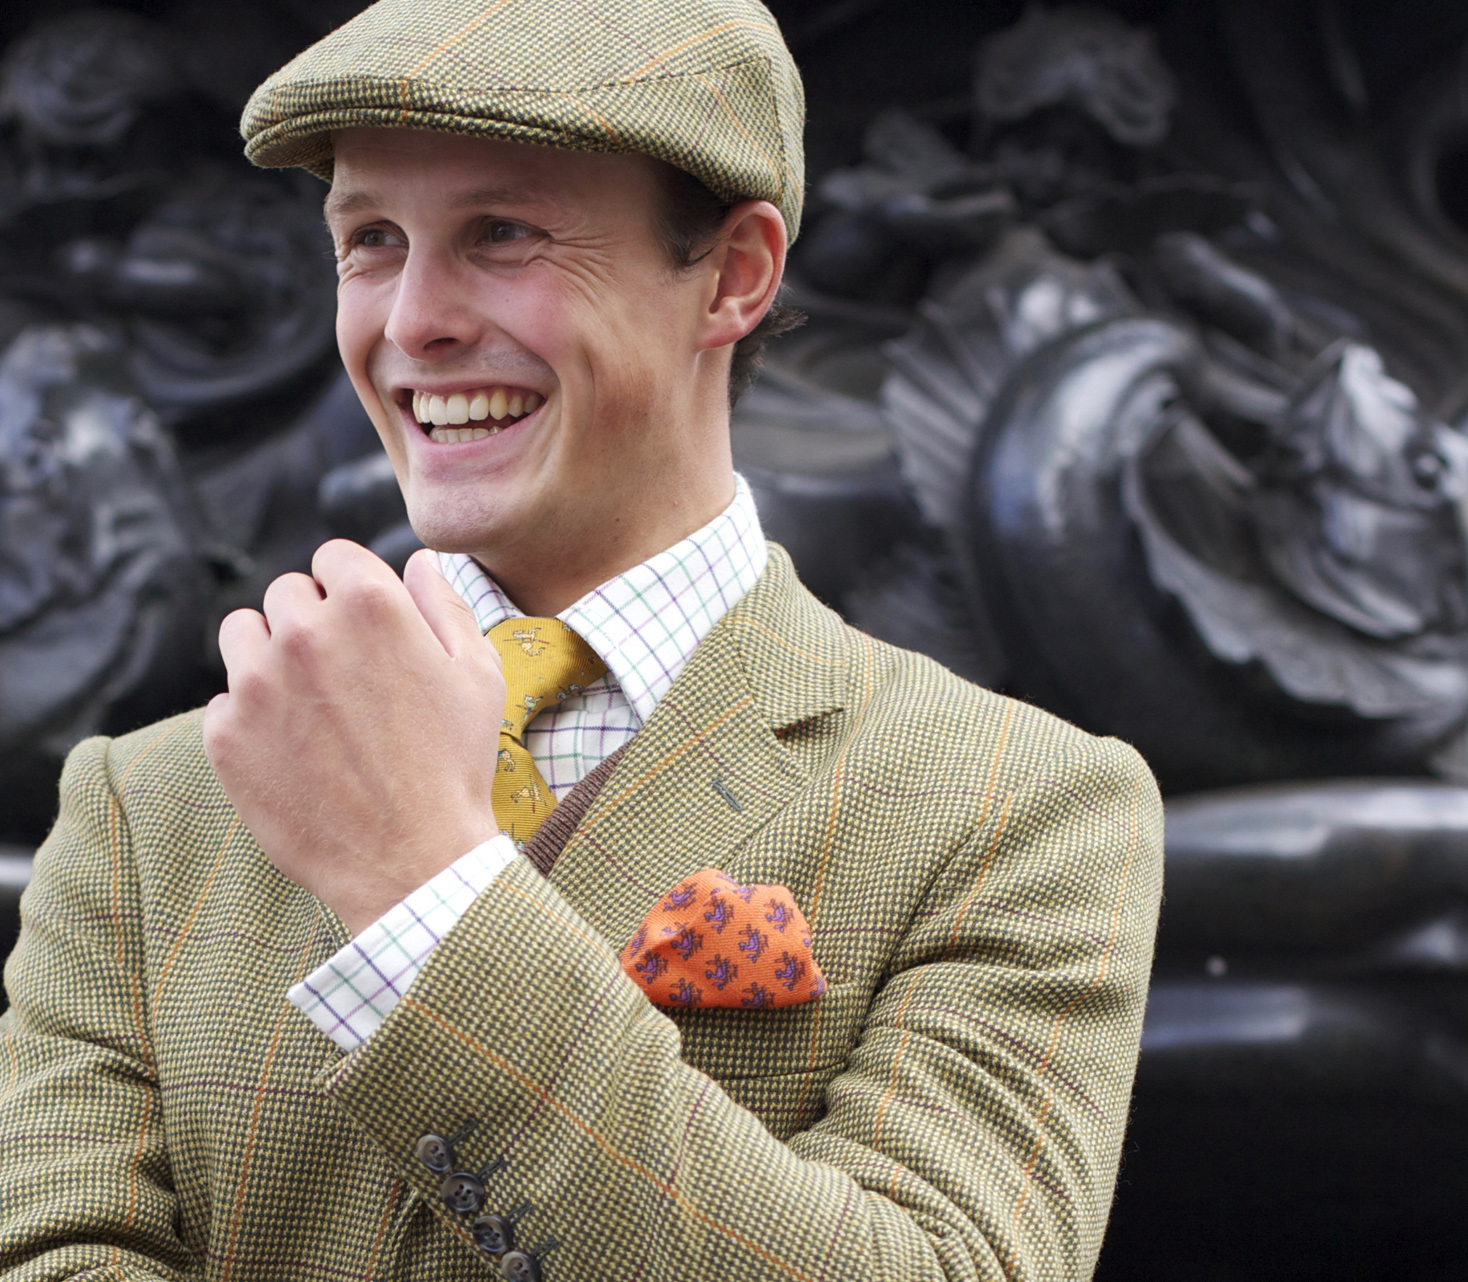 What to wear to The Tweed Run